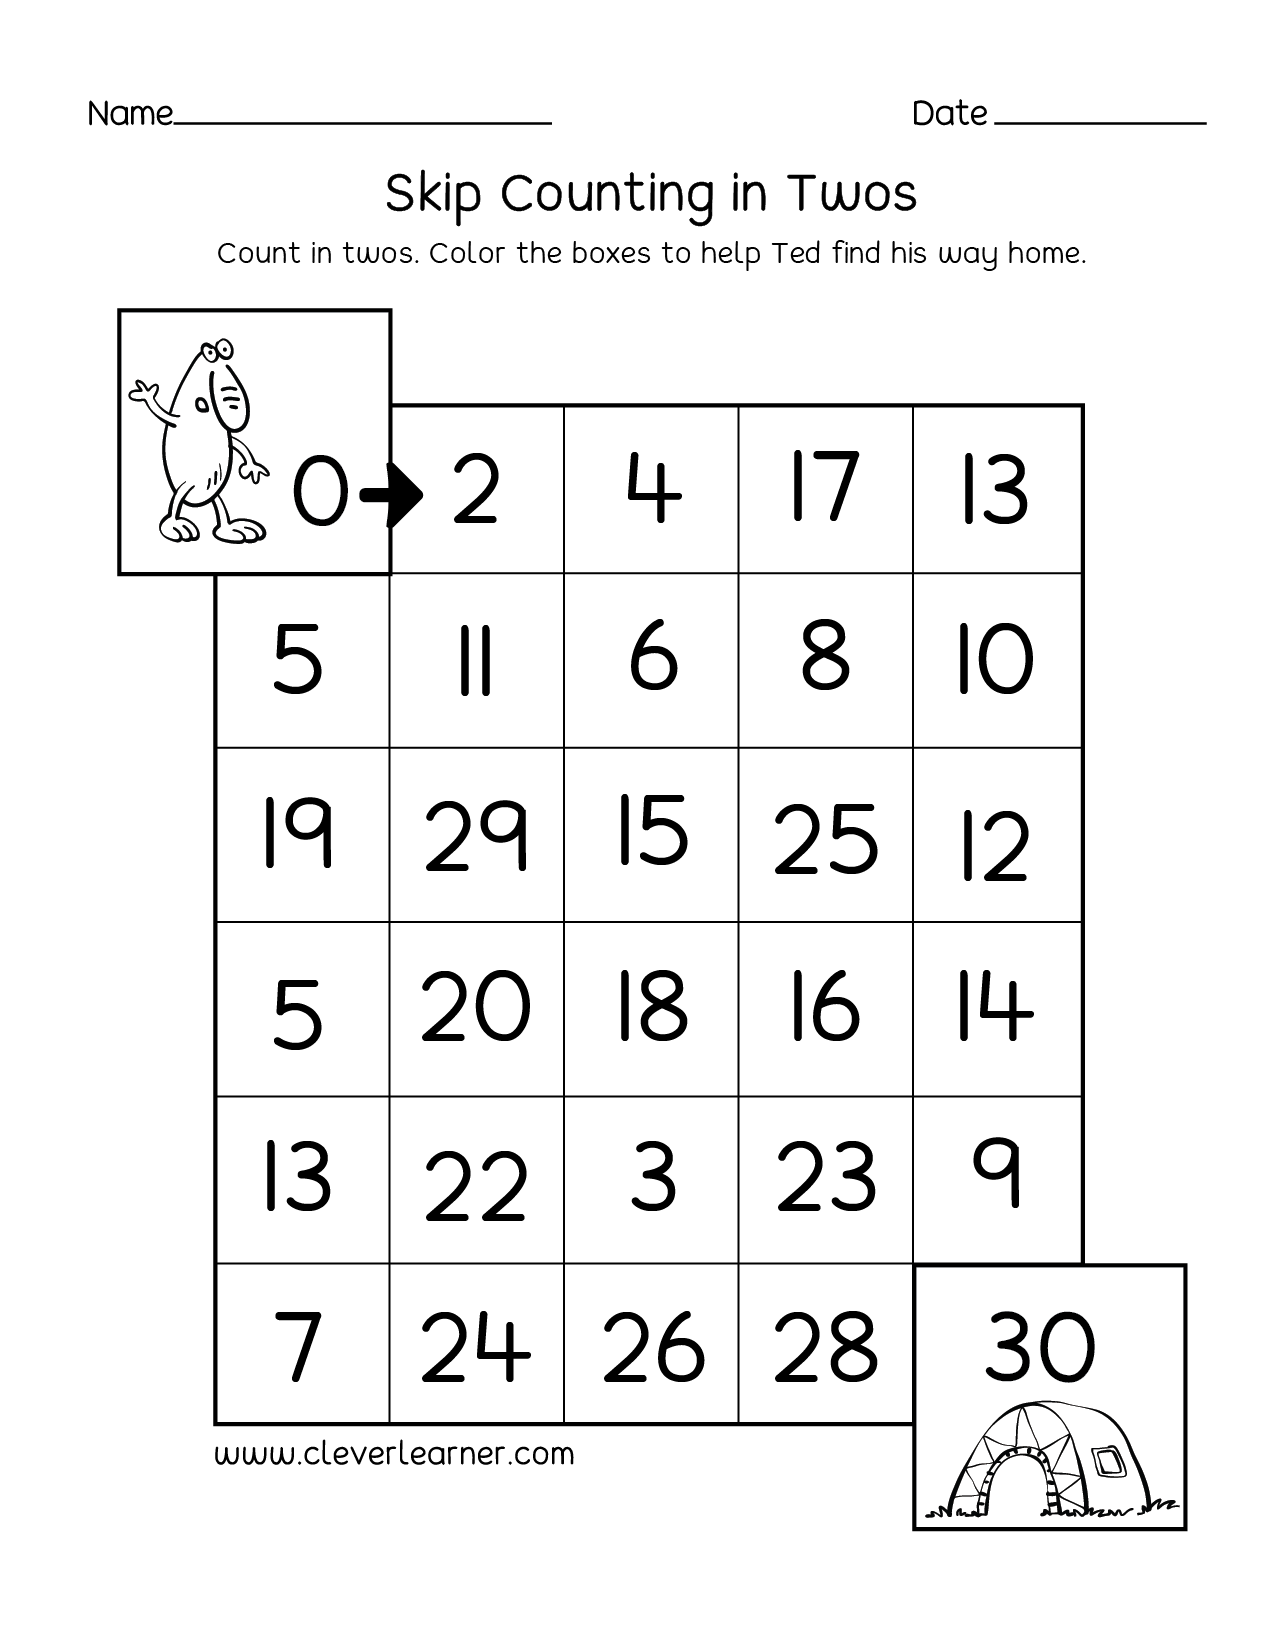 skipping-numbers-activities-and-worksheets-for-kindergarten-and-first-grade